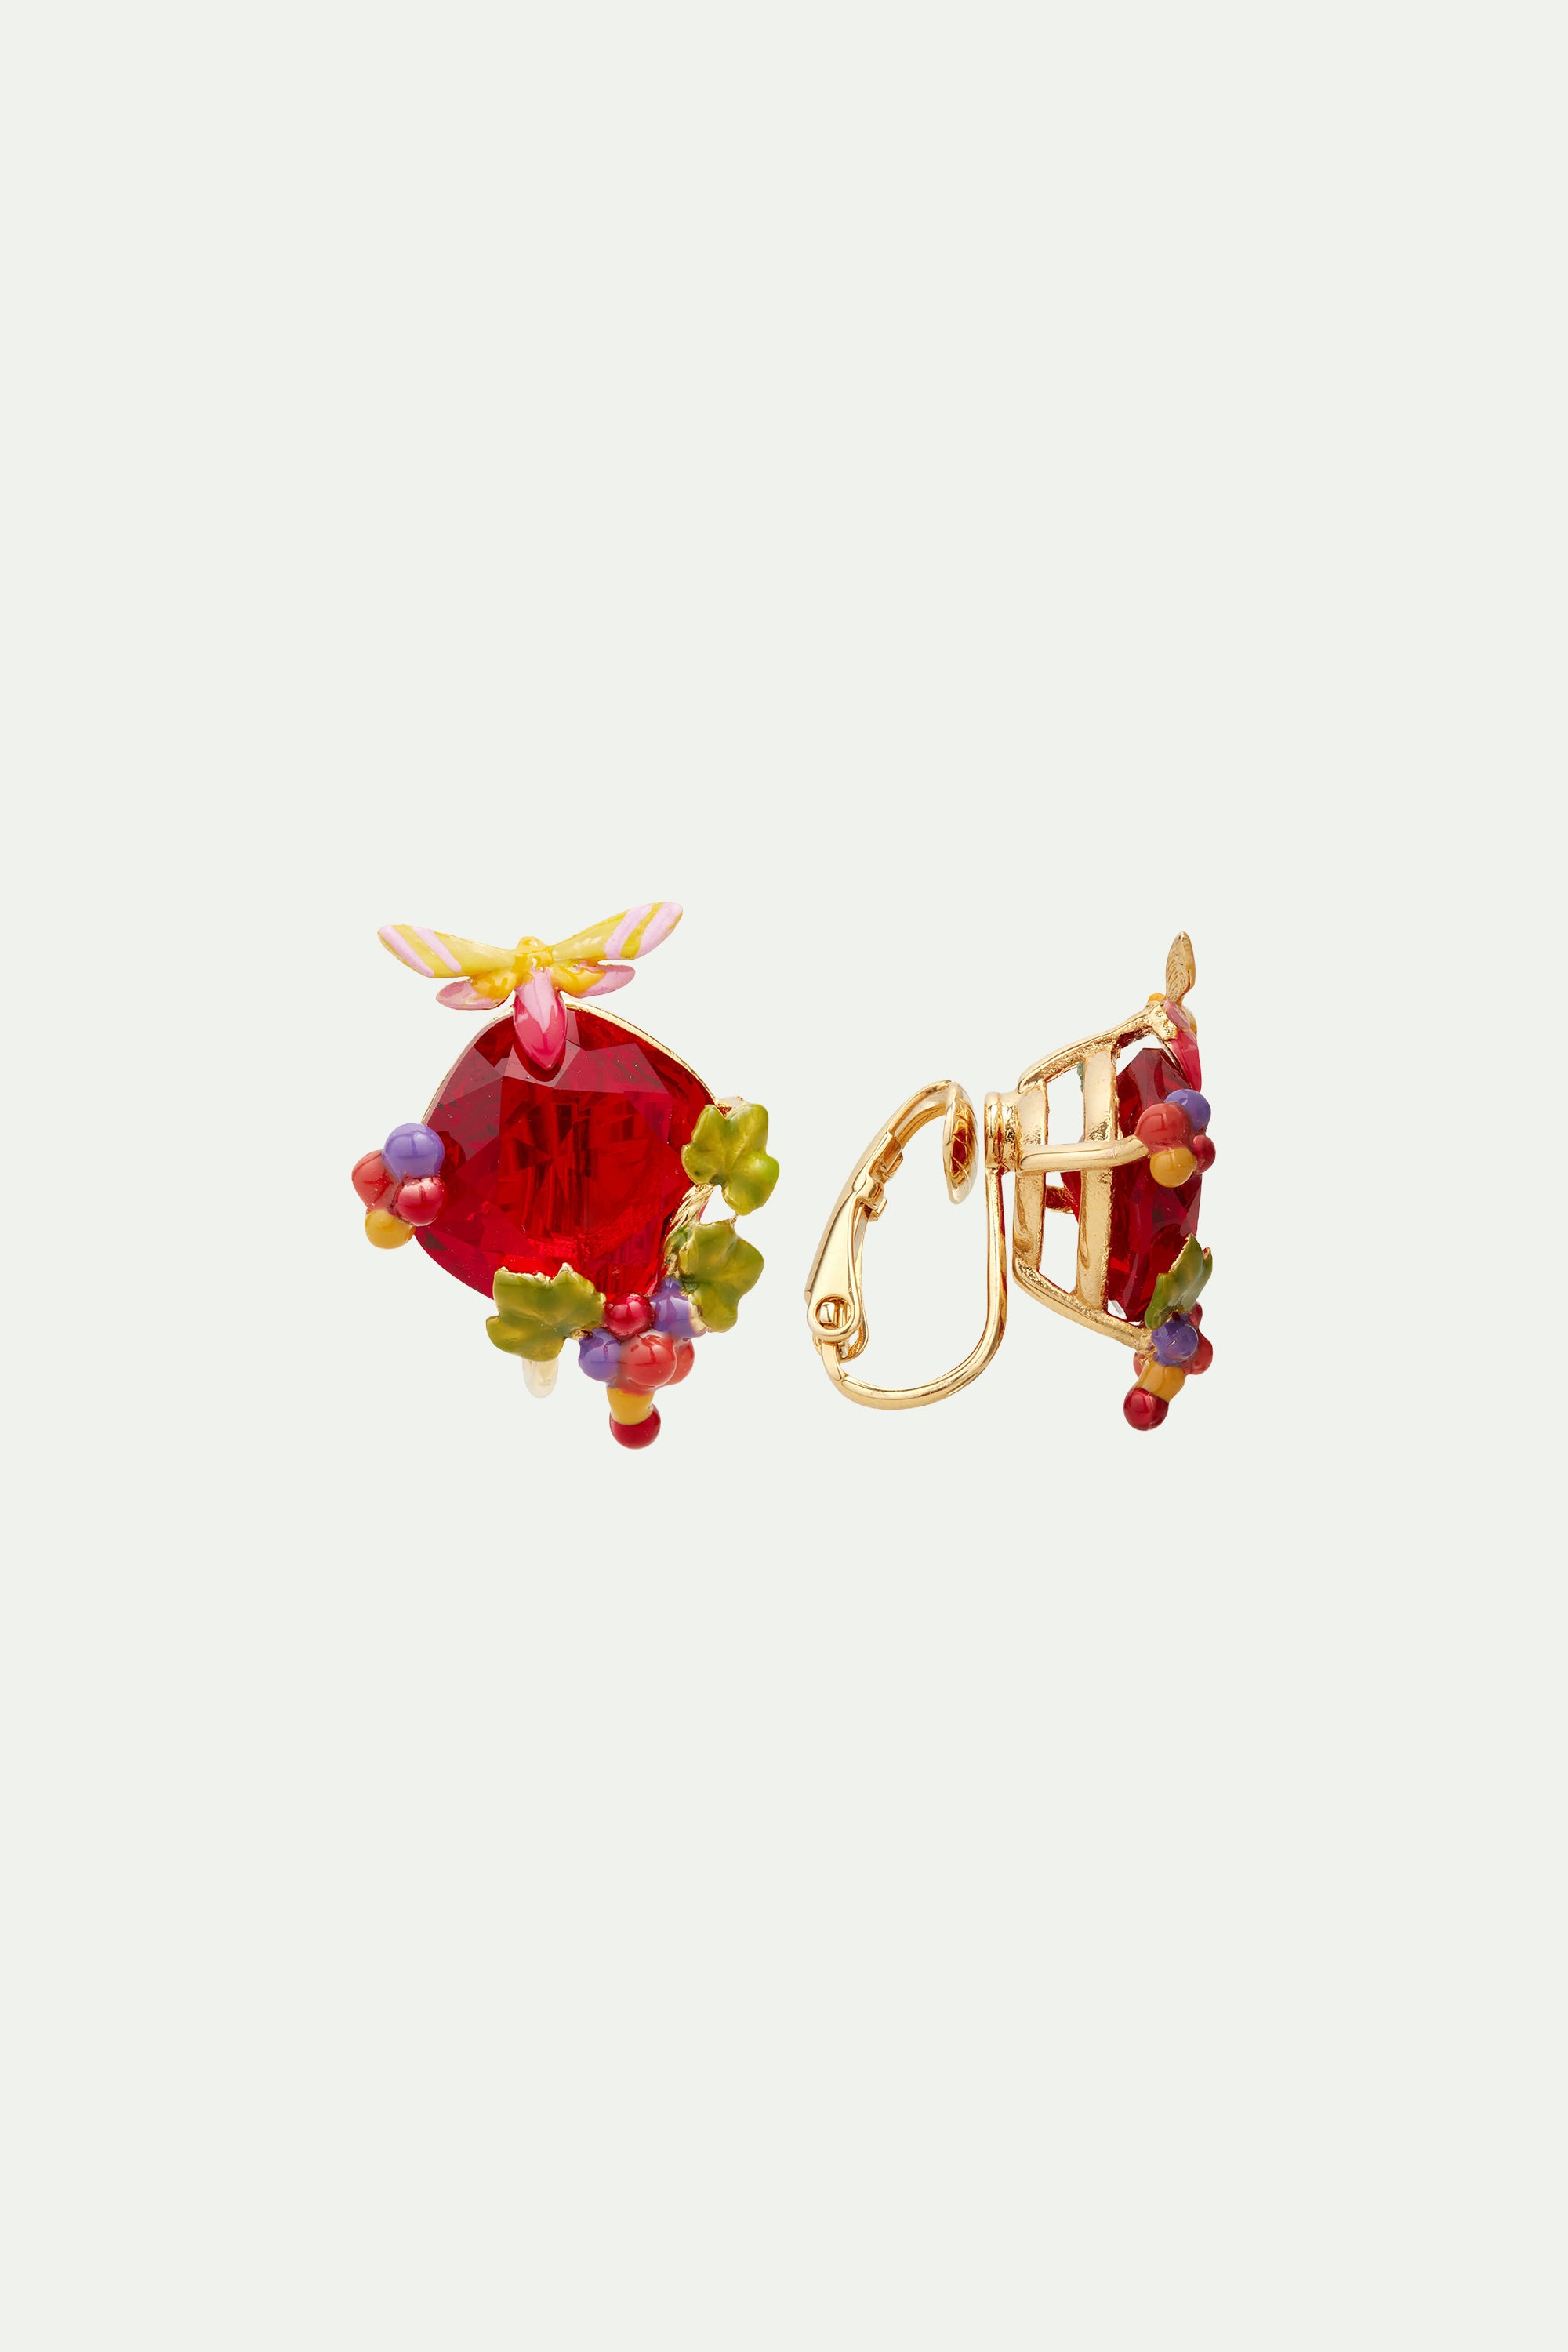 Grapes and butterfly earrings